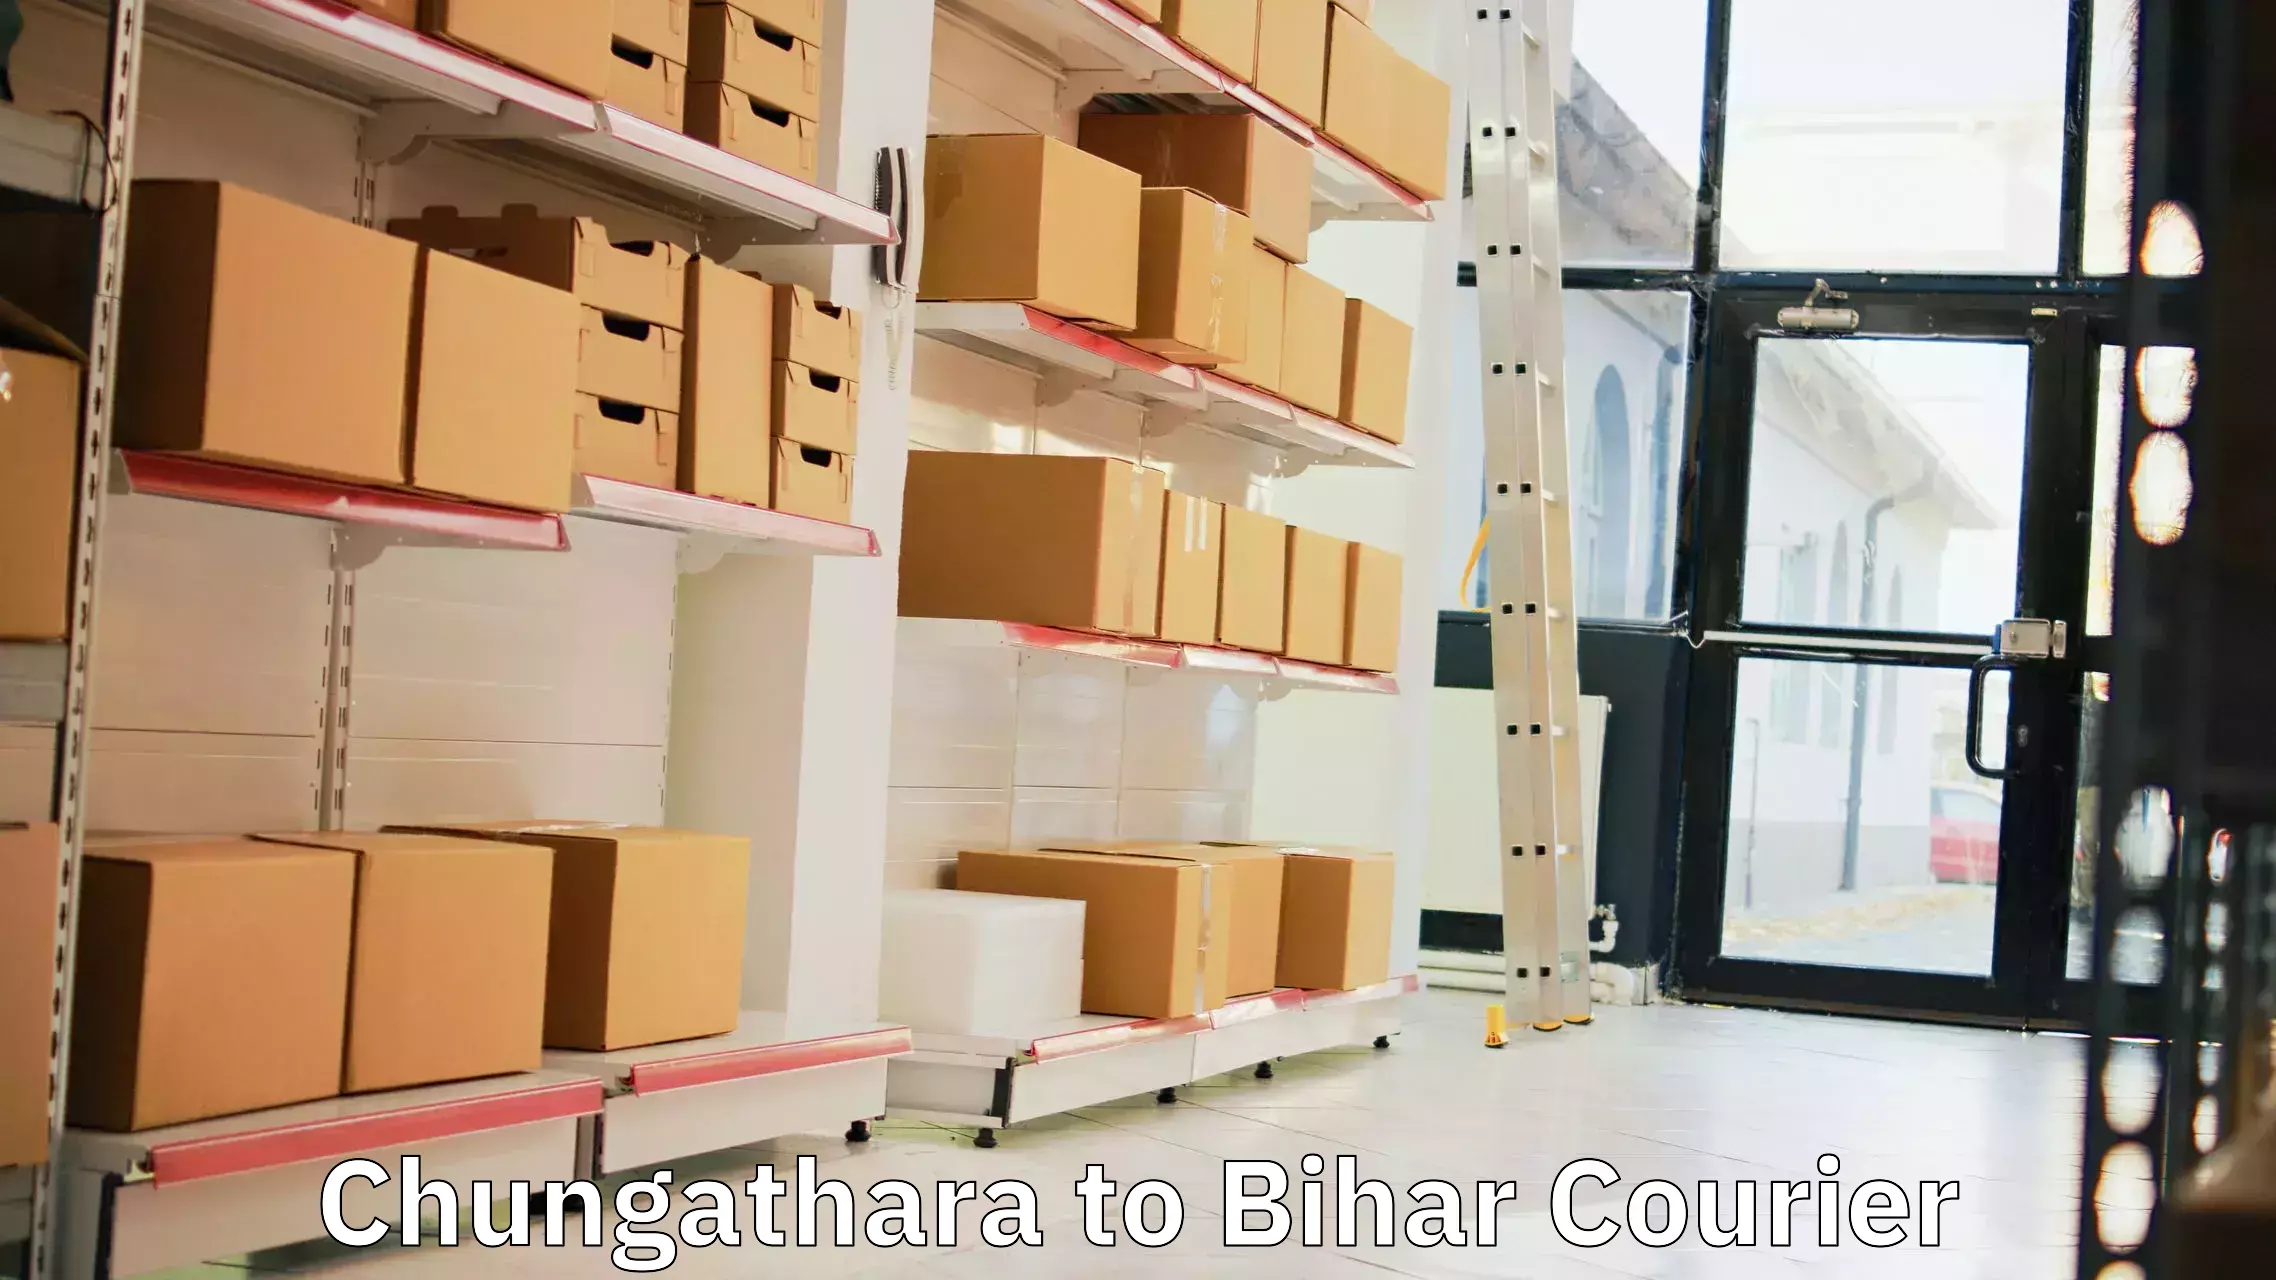 Next-generation courier services Chungathara to Dighwara